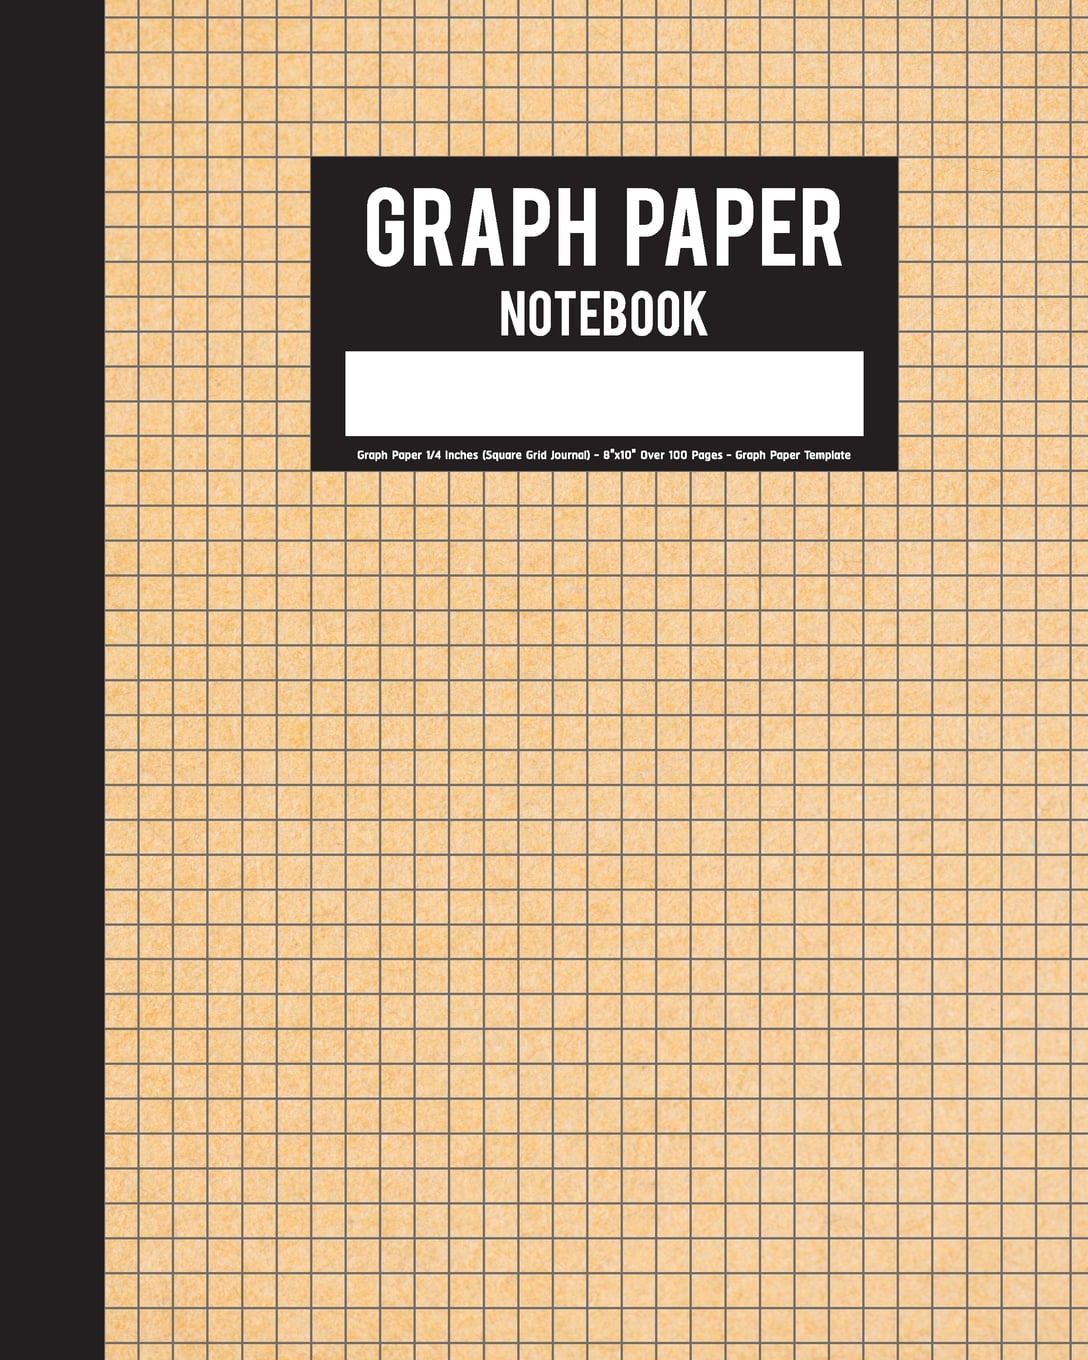 graph-paper-notebook-graph-paper-1-4-inches-square-grid-journal